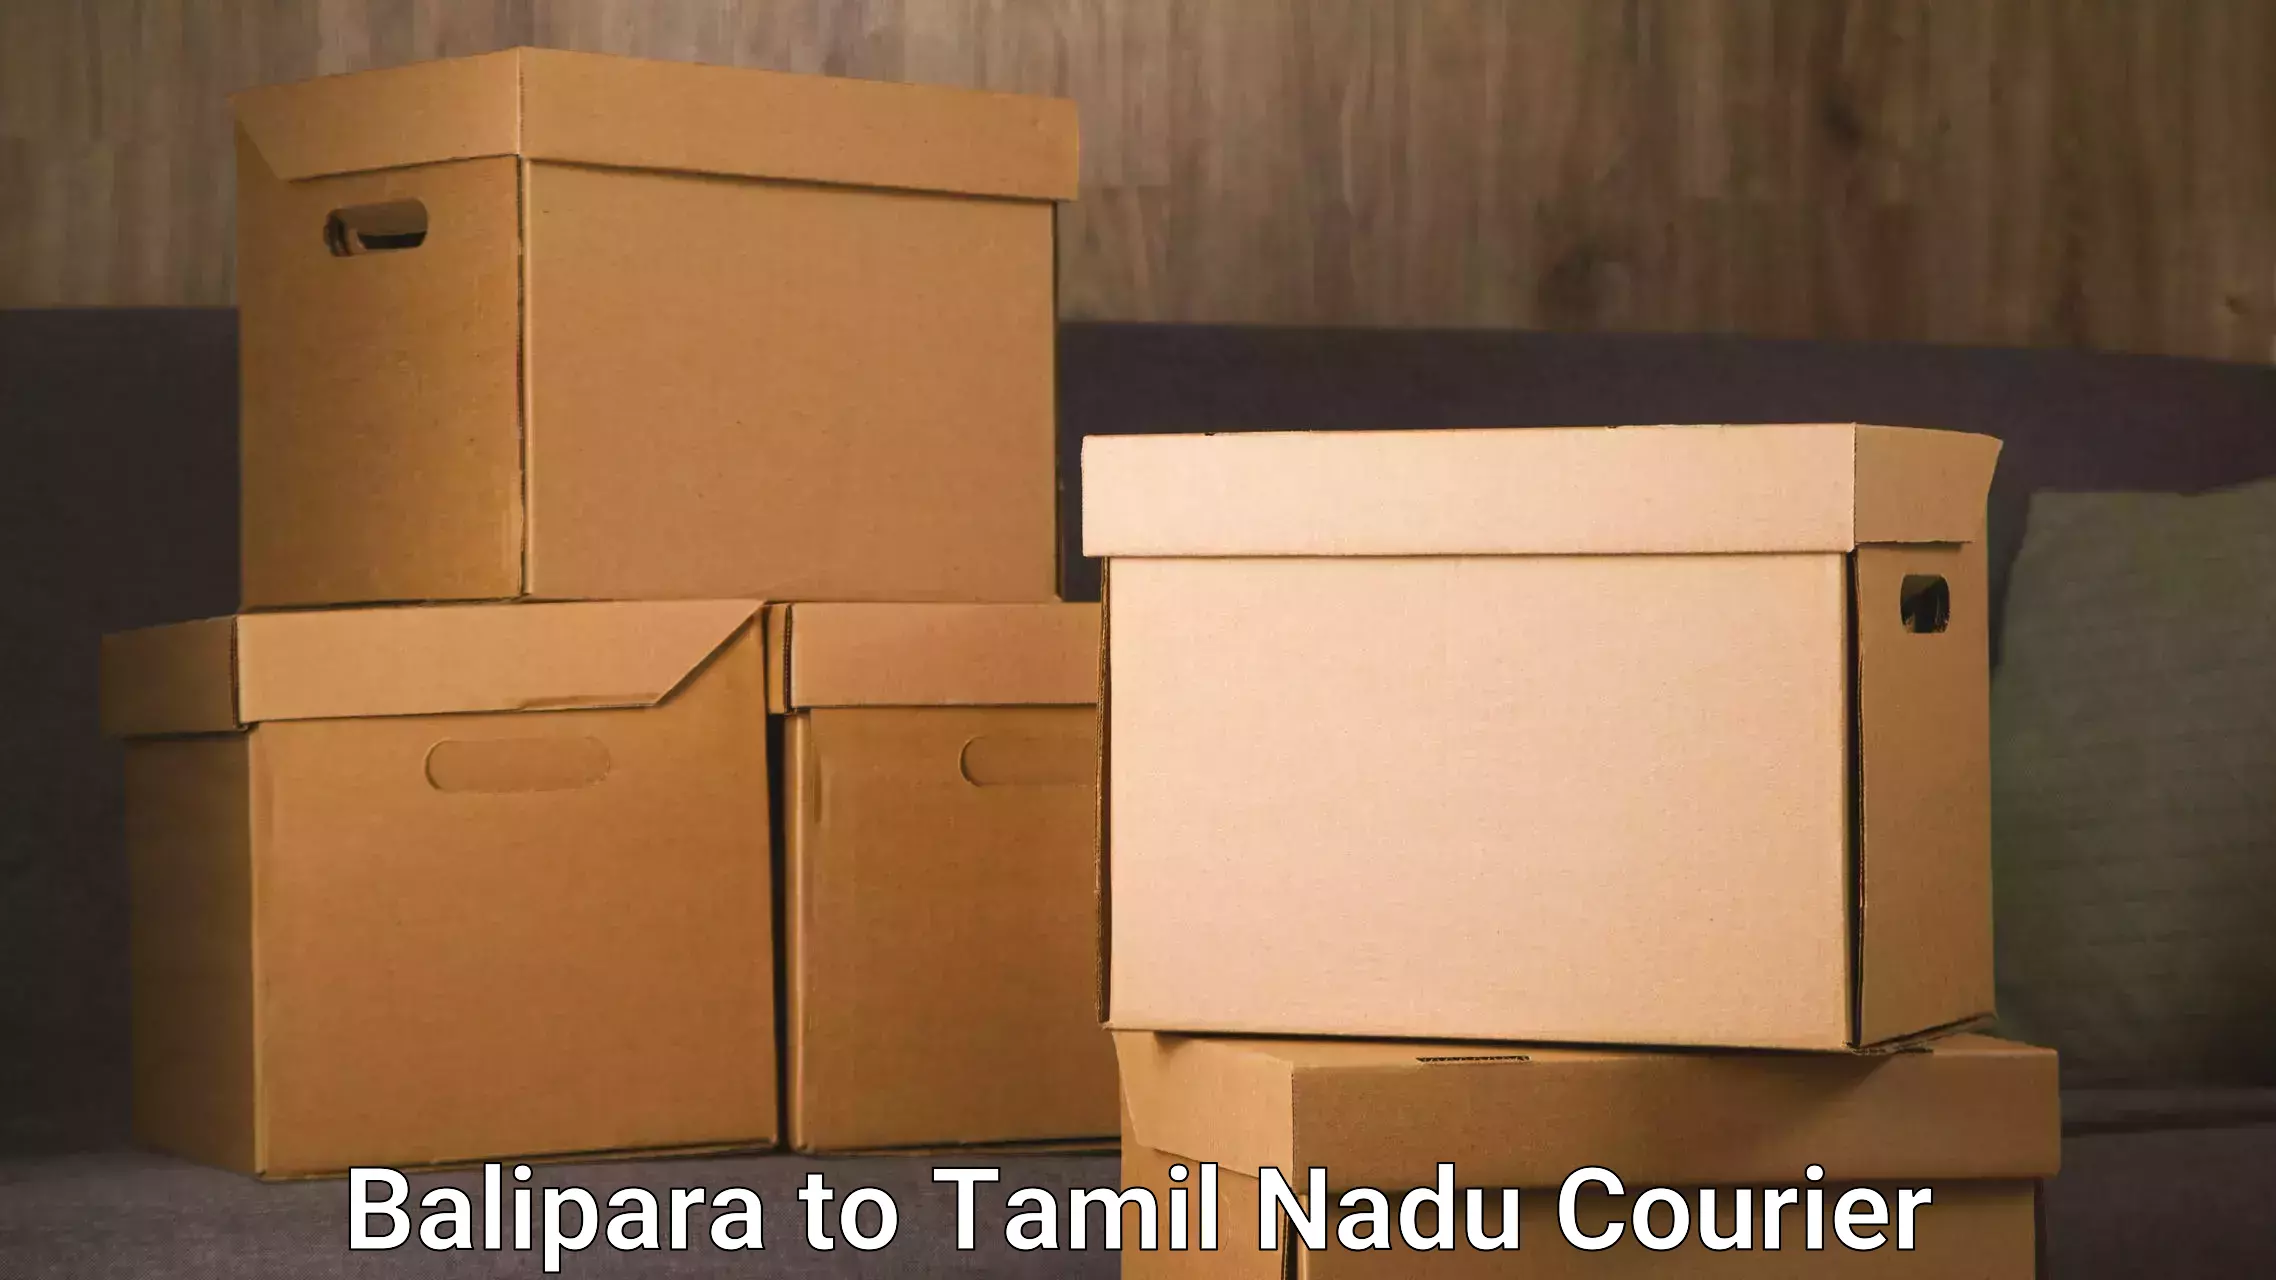 Express courier capabilities Balipara to Anthiyur